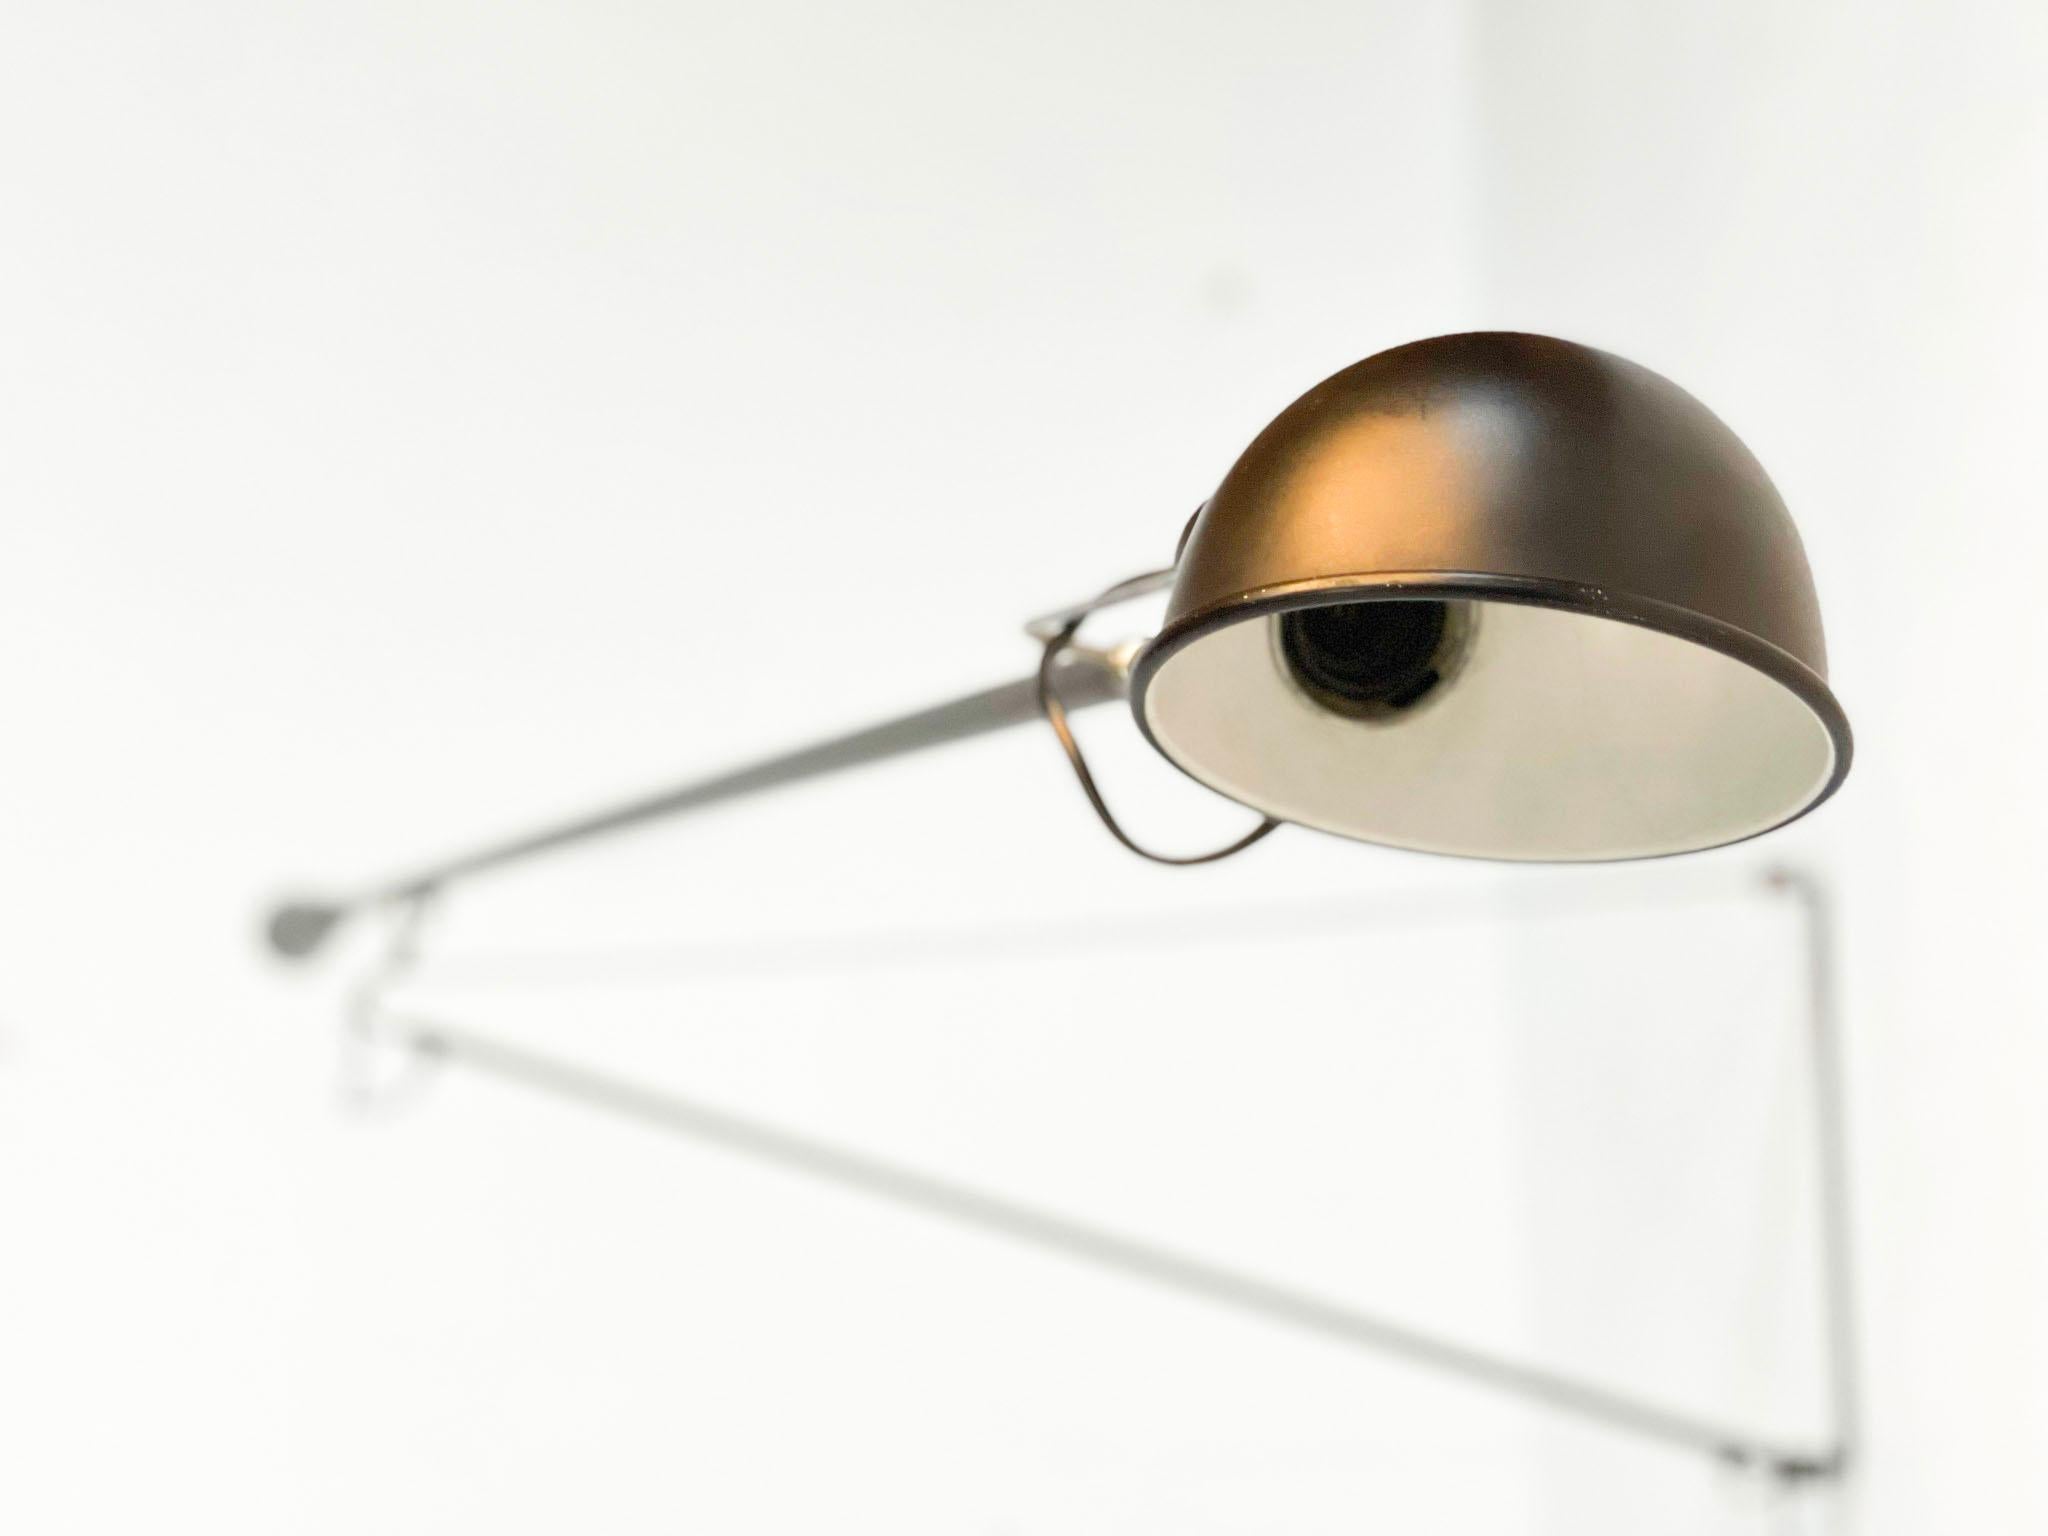 Late 20th Century 20th Century Italian 265 Wall Lamp by Paolo Rizzato for Arteluce For Sale